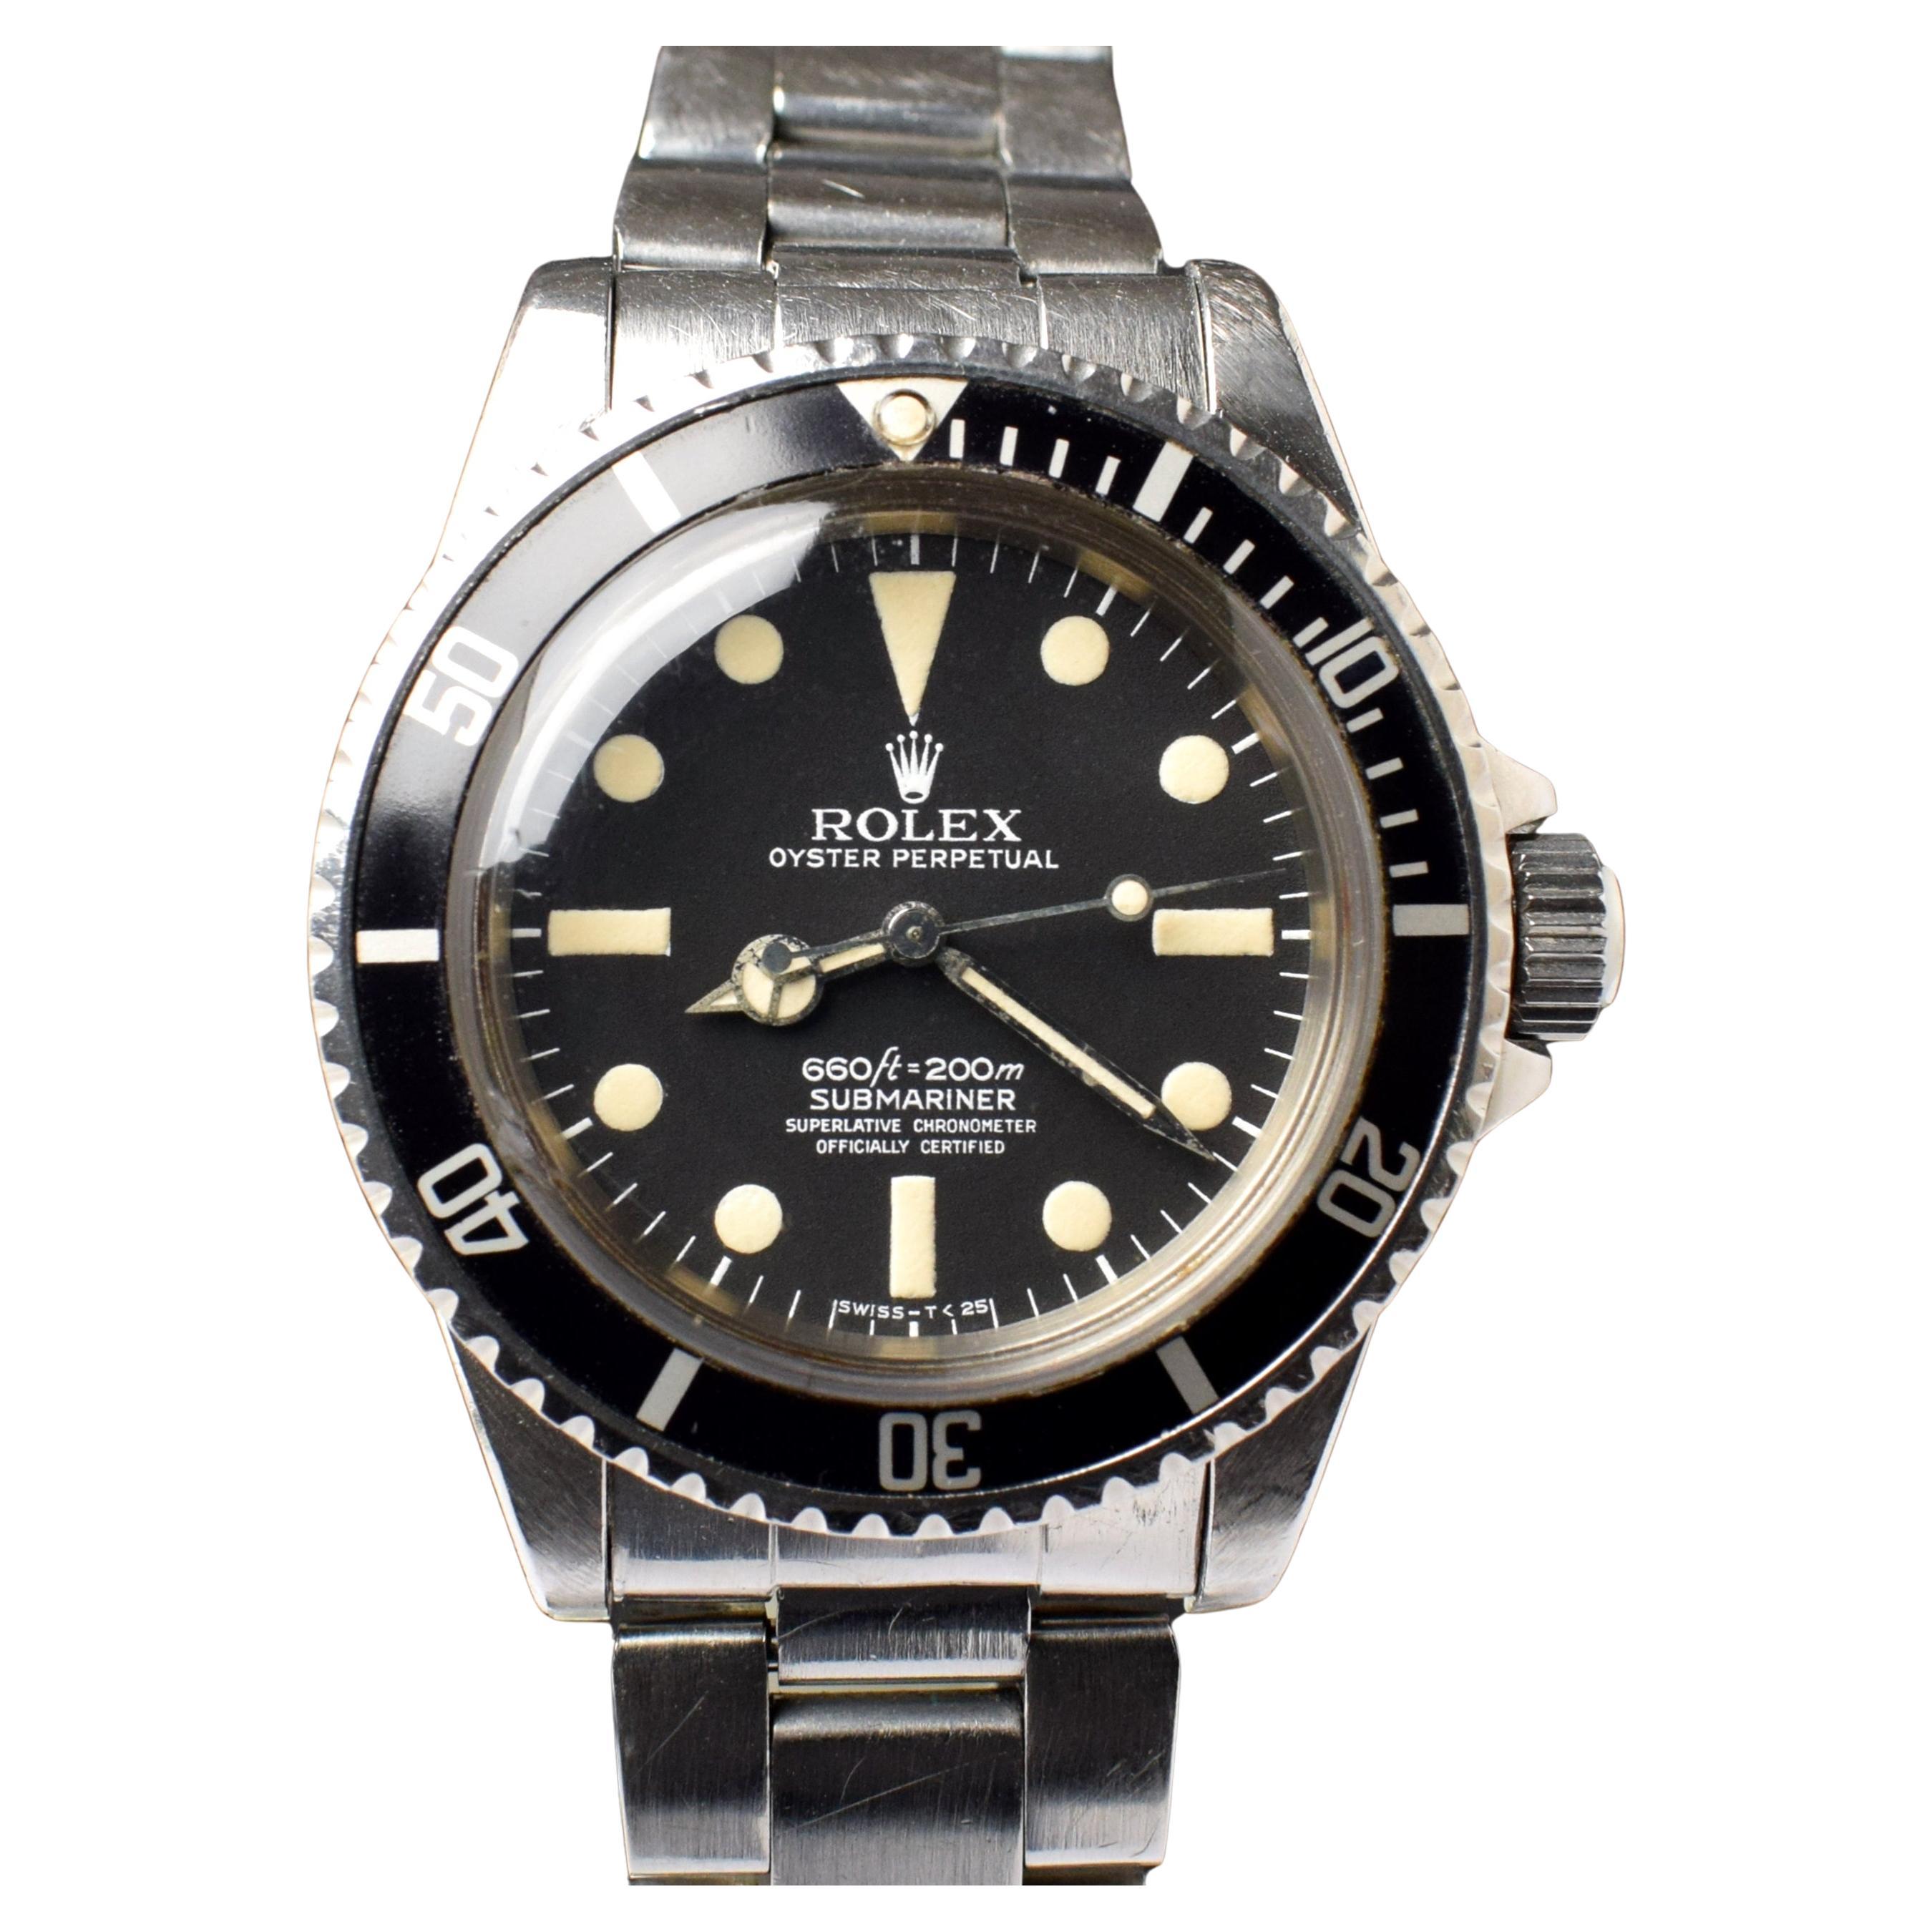 Rolex Submariner Matte Dial Maxi MK I 4 Lines 5512 Steel Automatic Watch 1977 For Sale